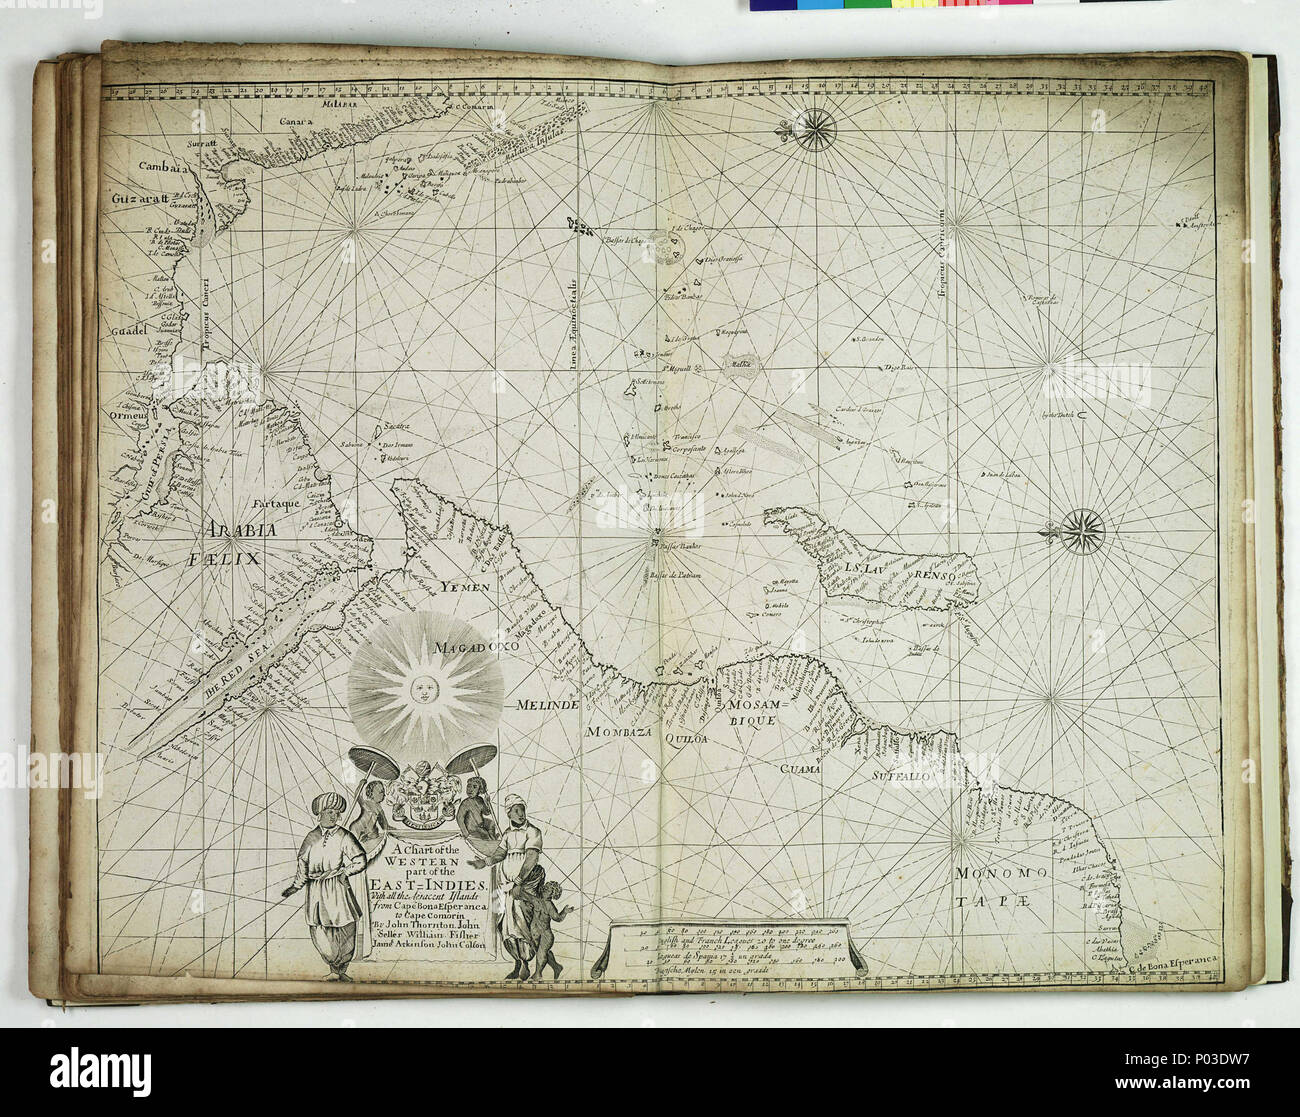 .  English: A chart of the western part of the East Indies. With all the adjacent islands, from Cape Bona Esperanca to Cape ComorinBound sheet. Engr. Scale: [ca. 1:14 000 000 (bar)]. Cartographic Note: North at 270 degrees. Borders graduated for latitude. Plane chart. Bar scales in English and French leagues, Spanish leagues and Dutch miles (altered from first state of chart). Additional Places: Indian Ocean. A chart from the 'English Pilot, the Third Book, describing ... the Oriental Navigation'. Although it has the same title and coverage as a chart in Seller's 1675 Atlas Maritimus, this is  Stock Photo